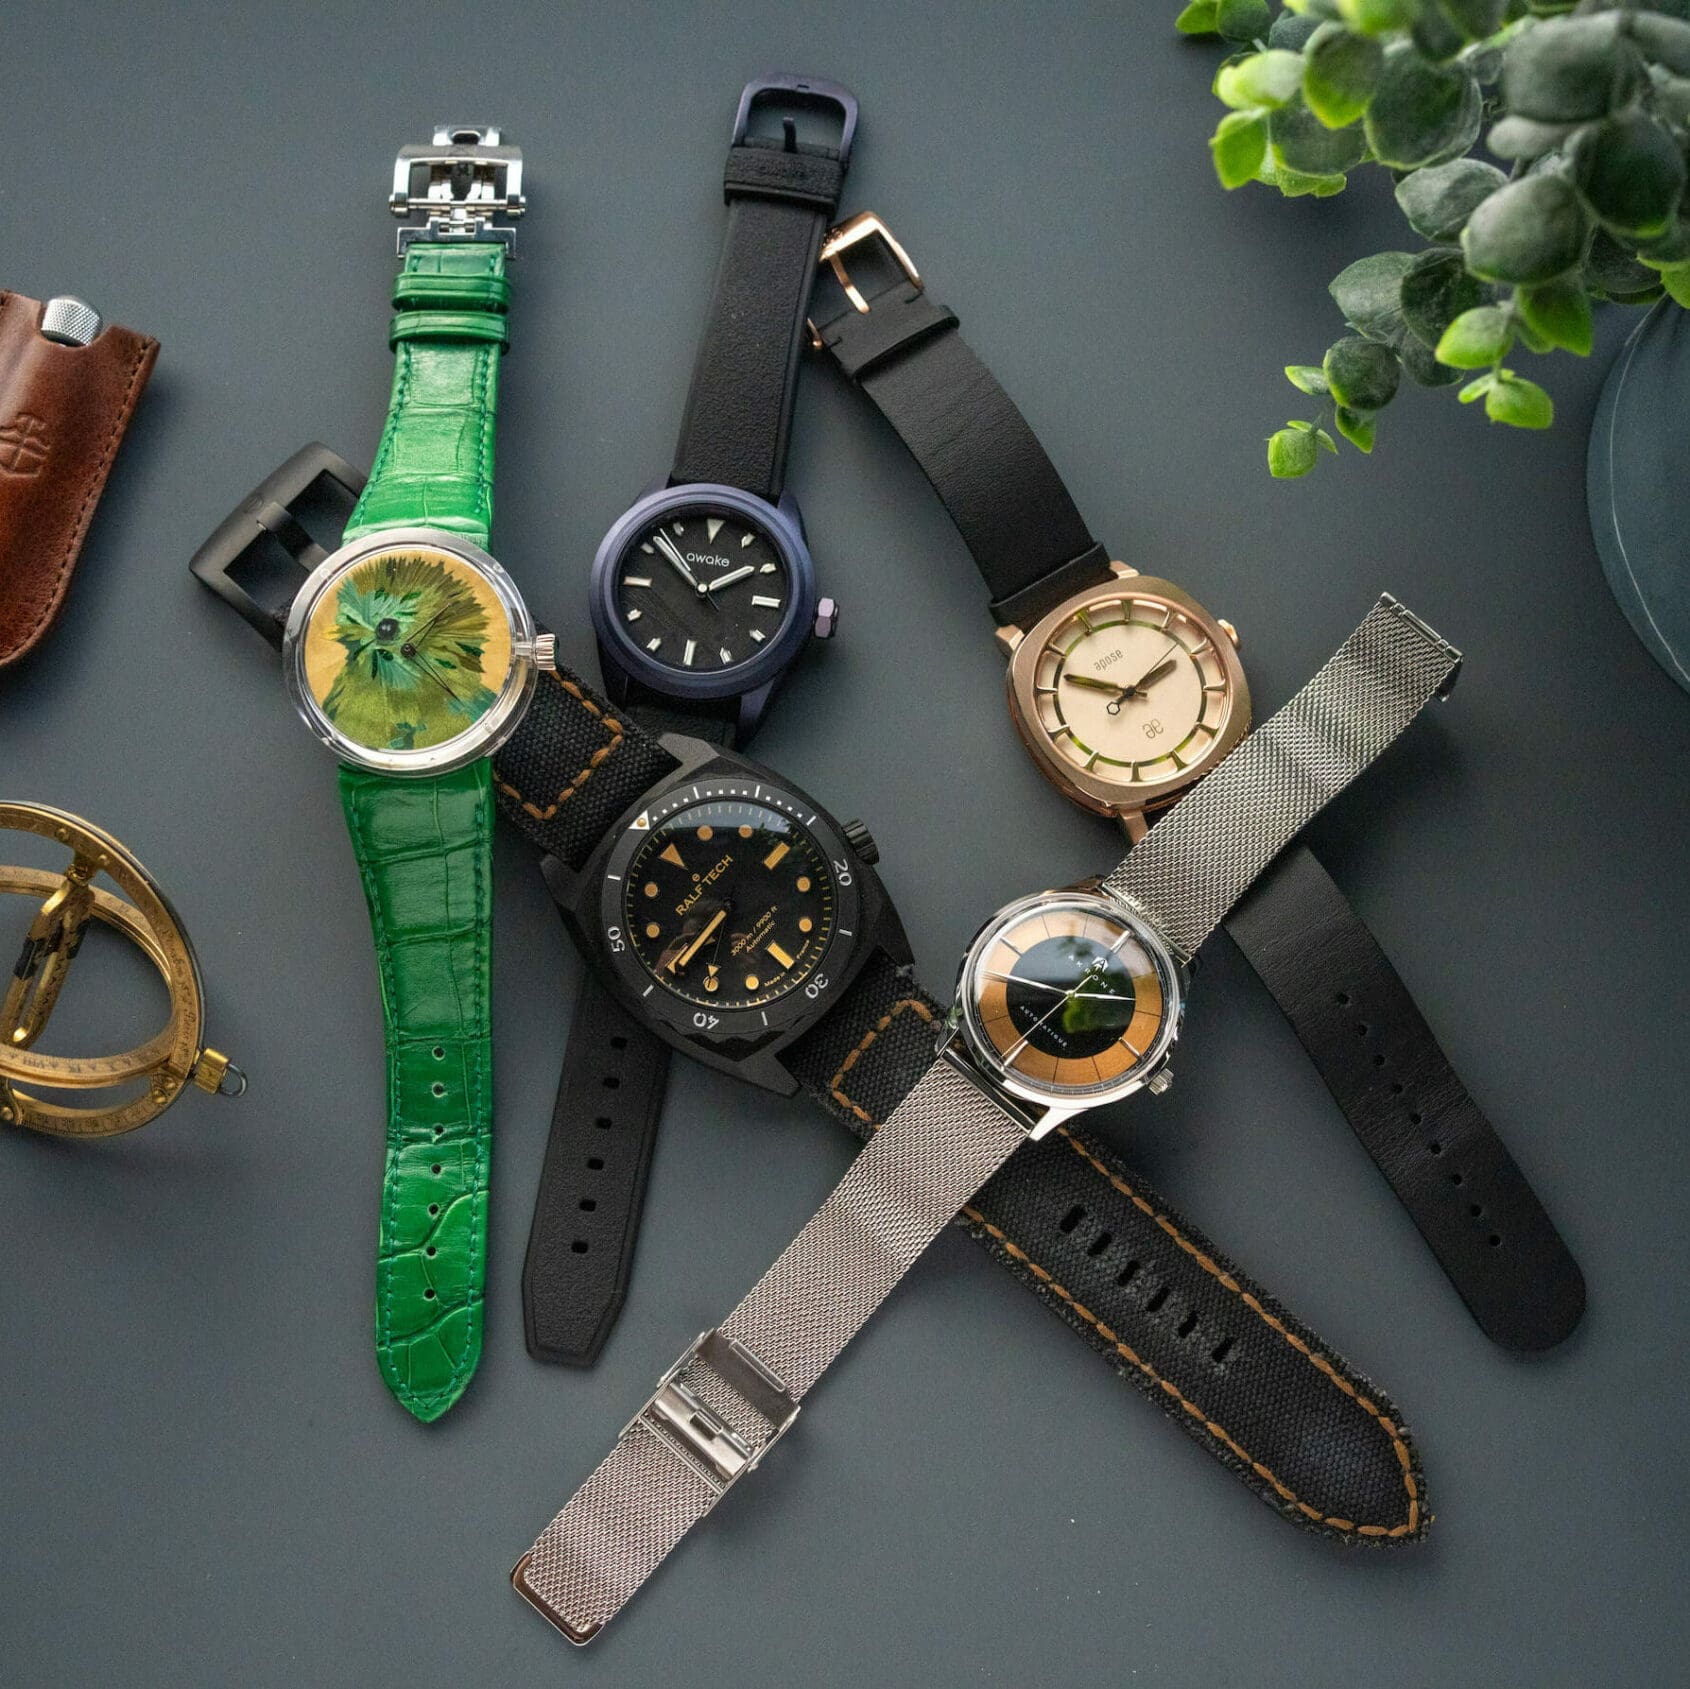 5 French watch brands you’ve never heard of but should know